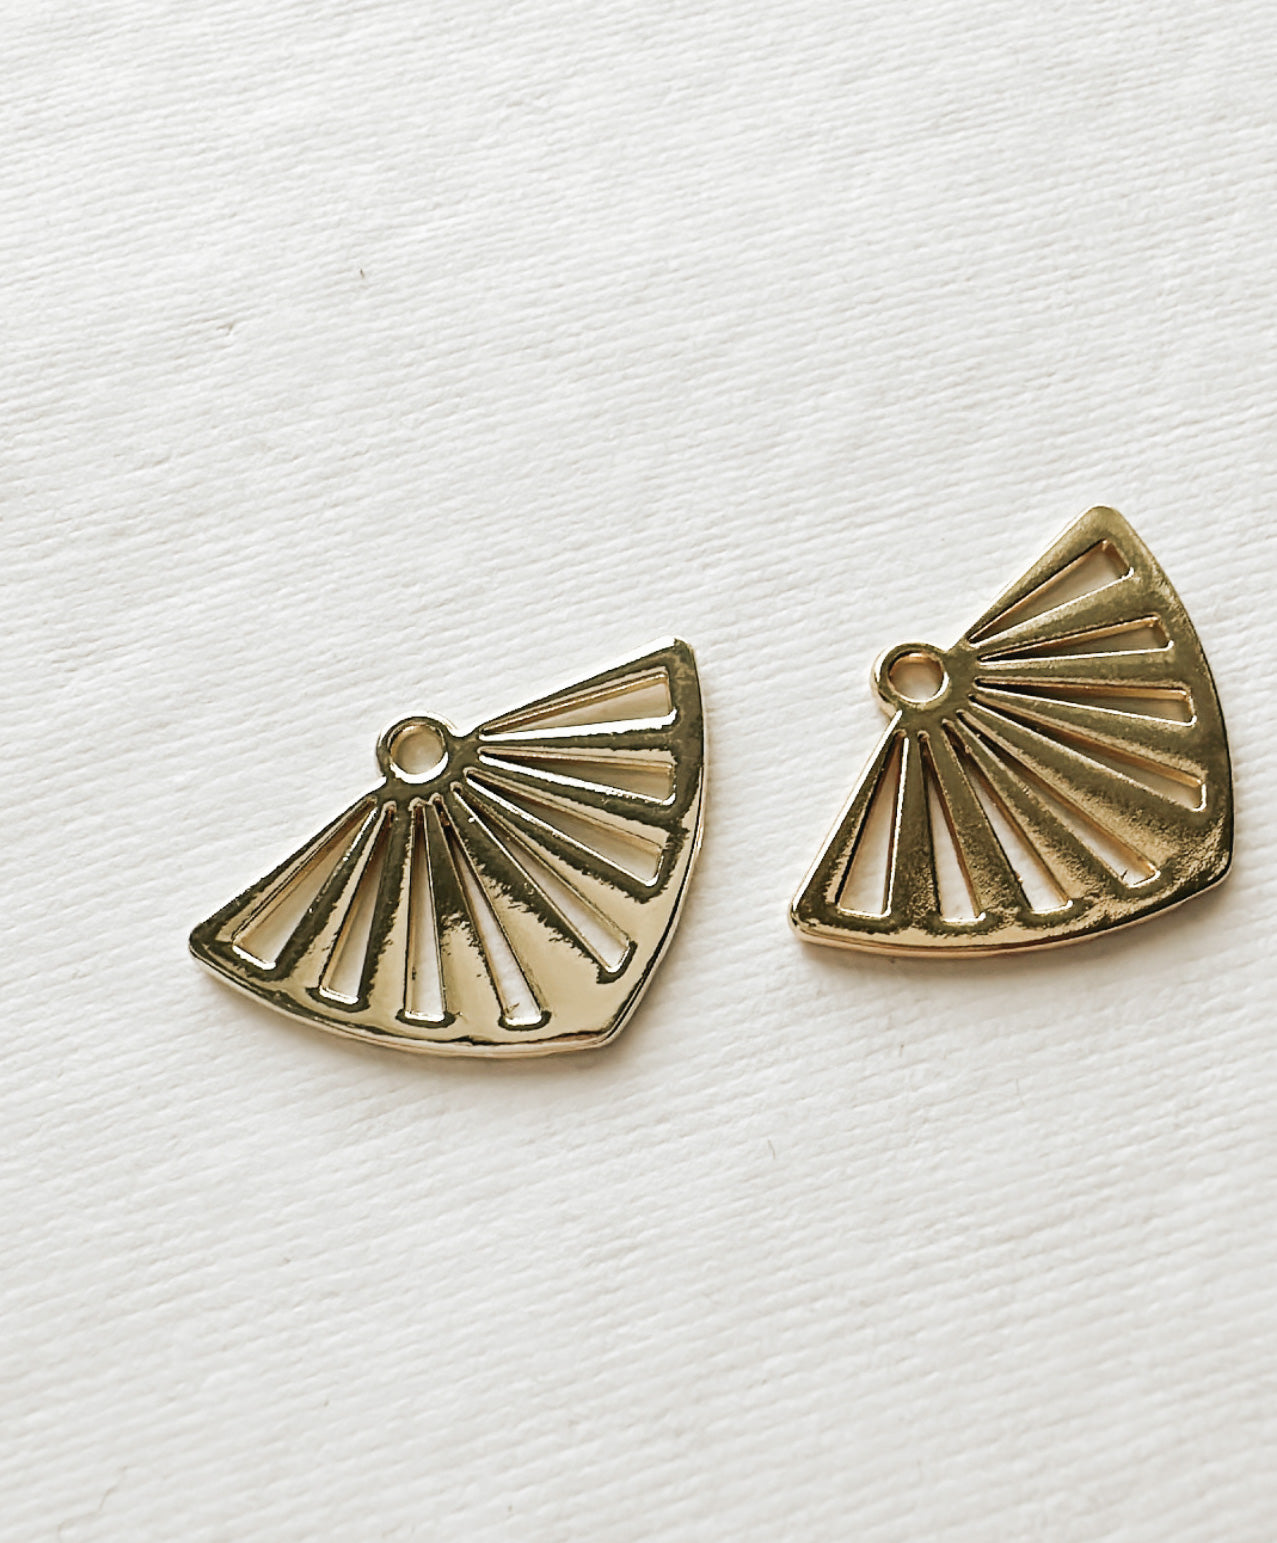 Alloy Gold Fan Charms (Set of 2)